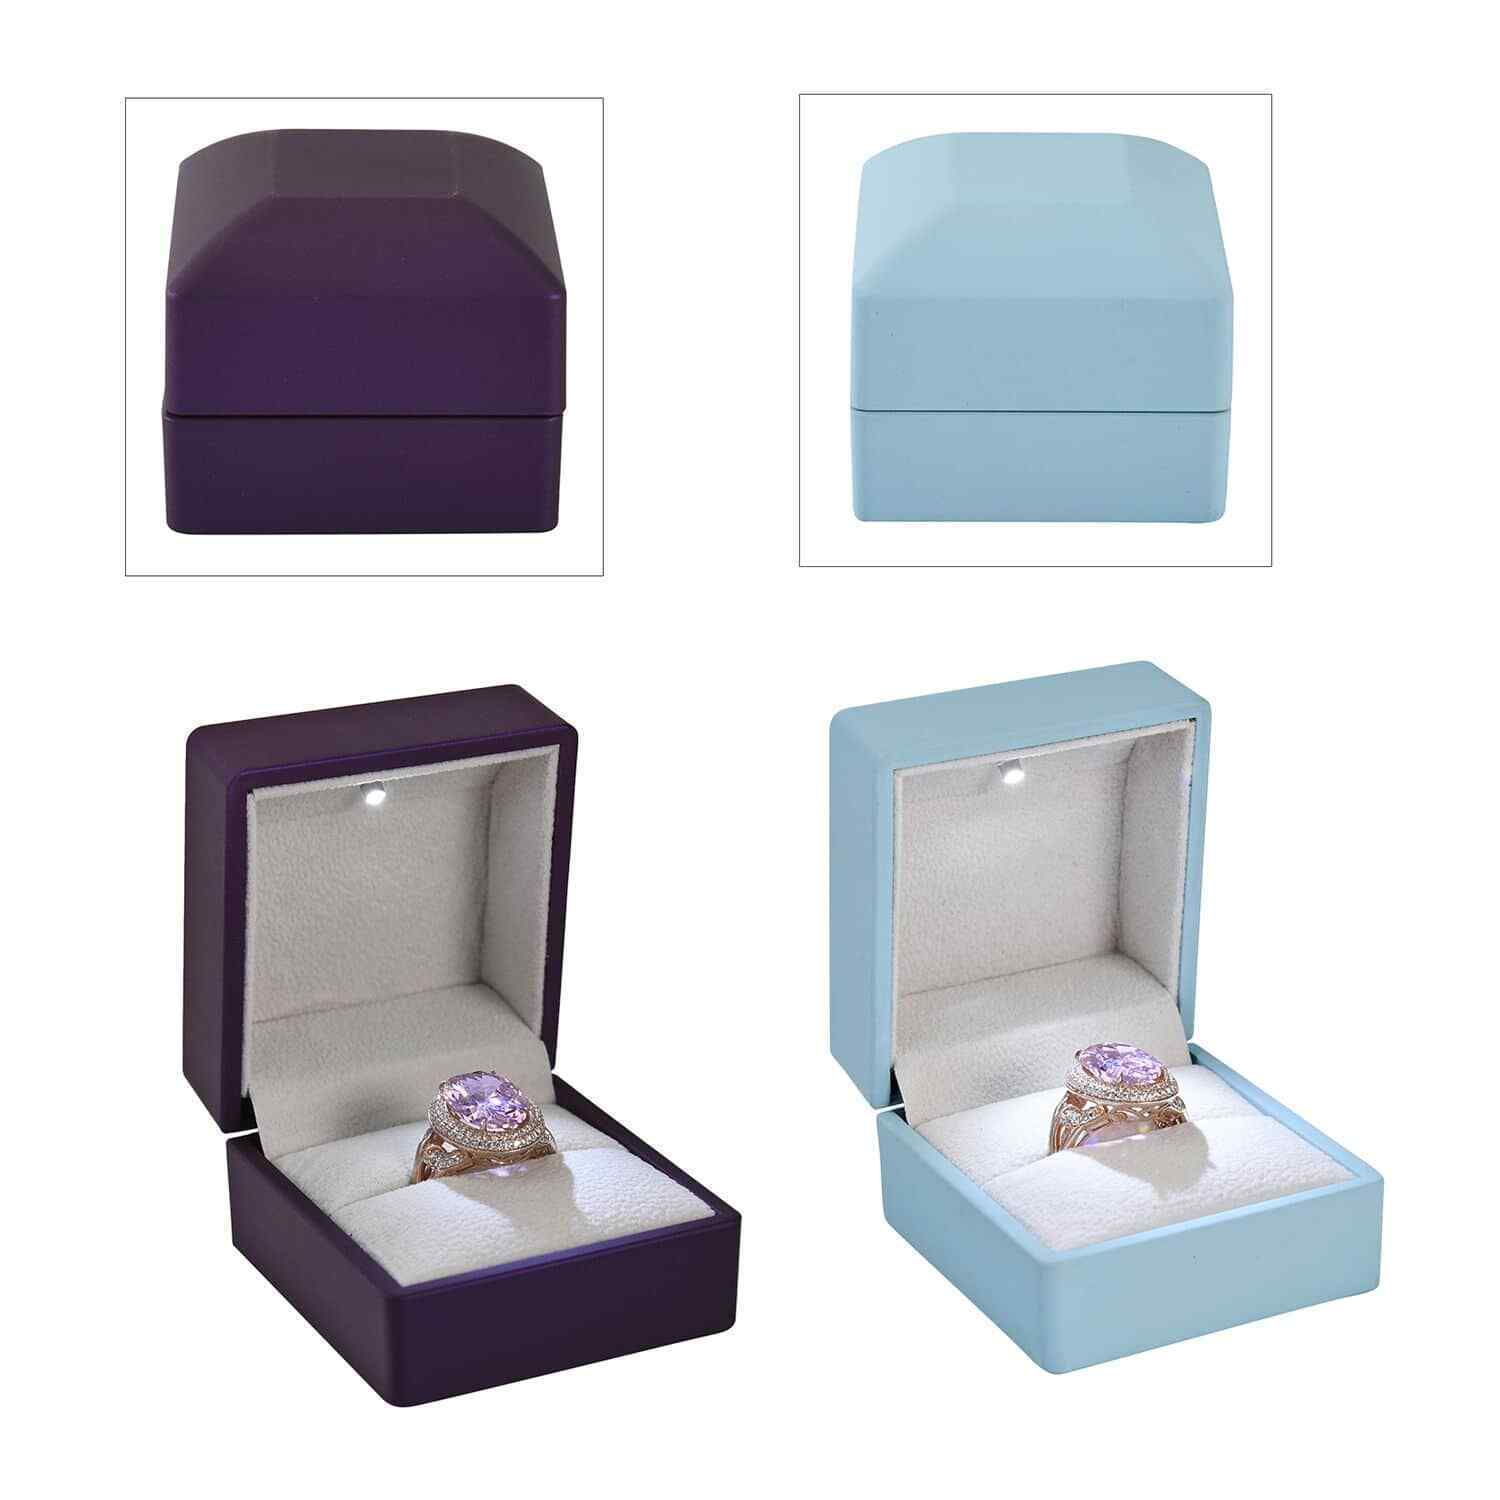 Set of 2 Sky Blue Purple Solid Polish Led Light Ring Box Can Hold up to 2 Rings